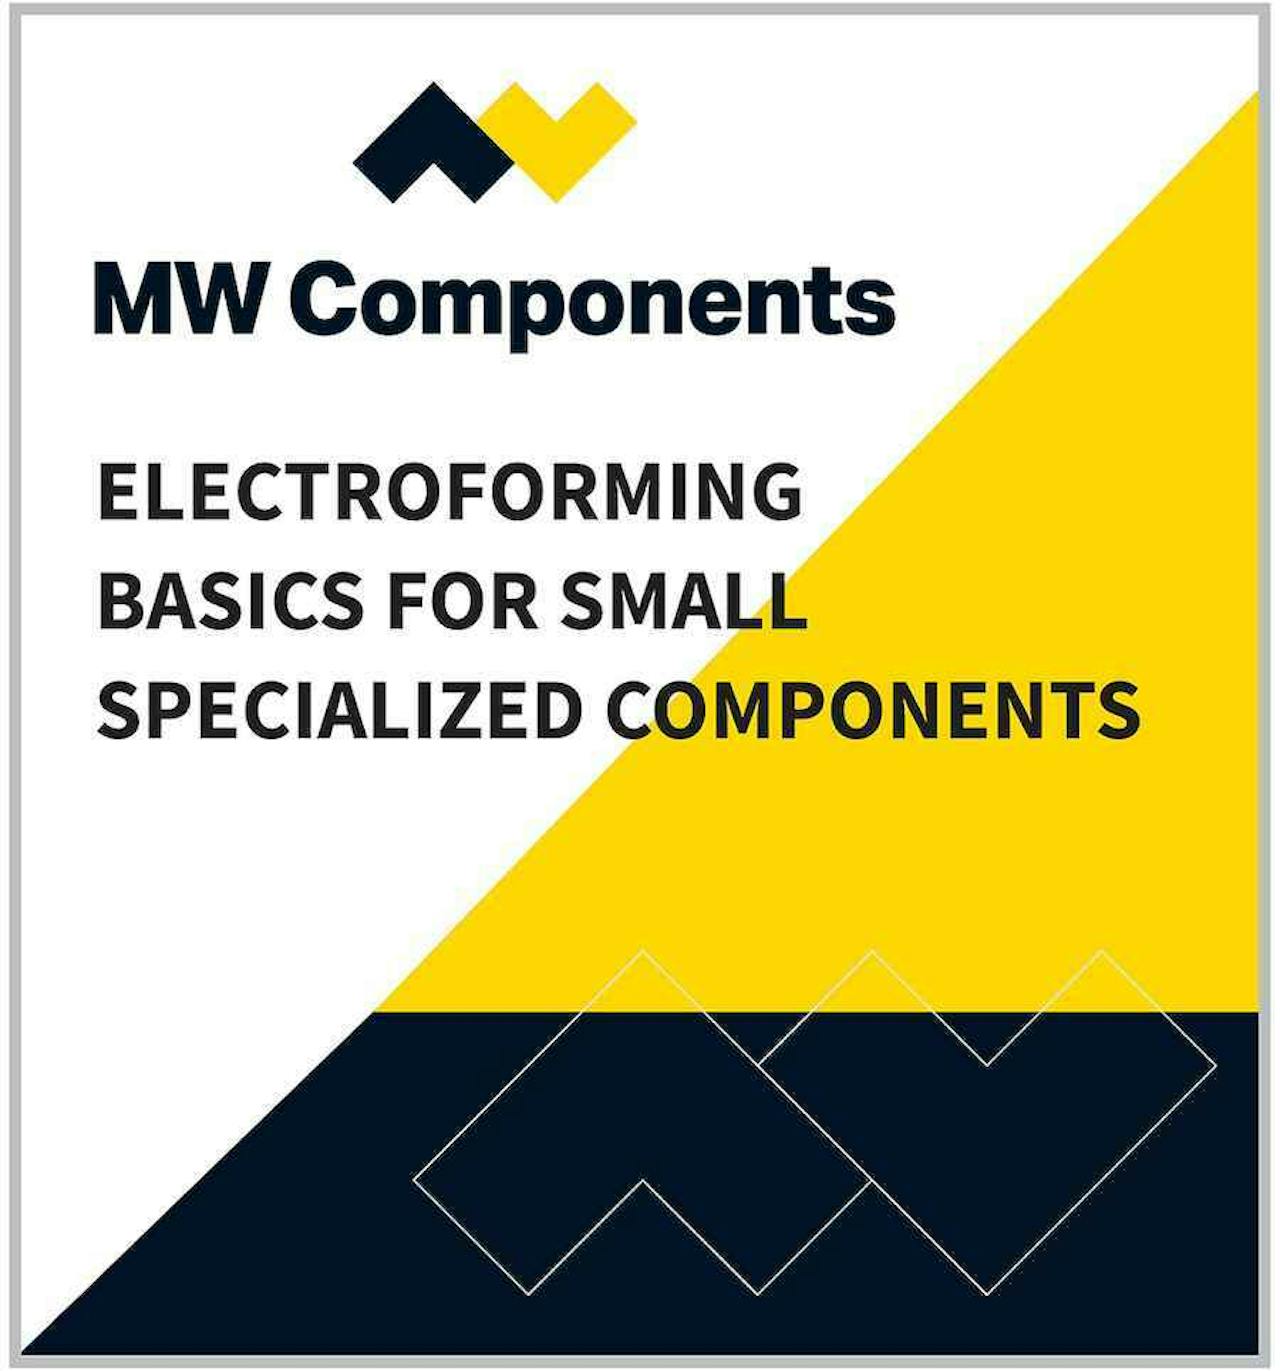 MWC Electroforming Basics for Small Specialized Components